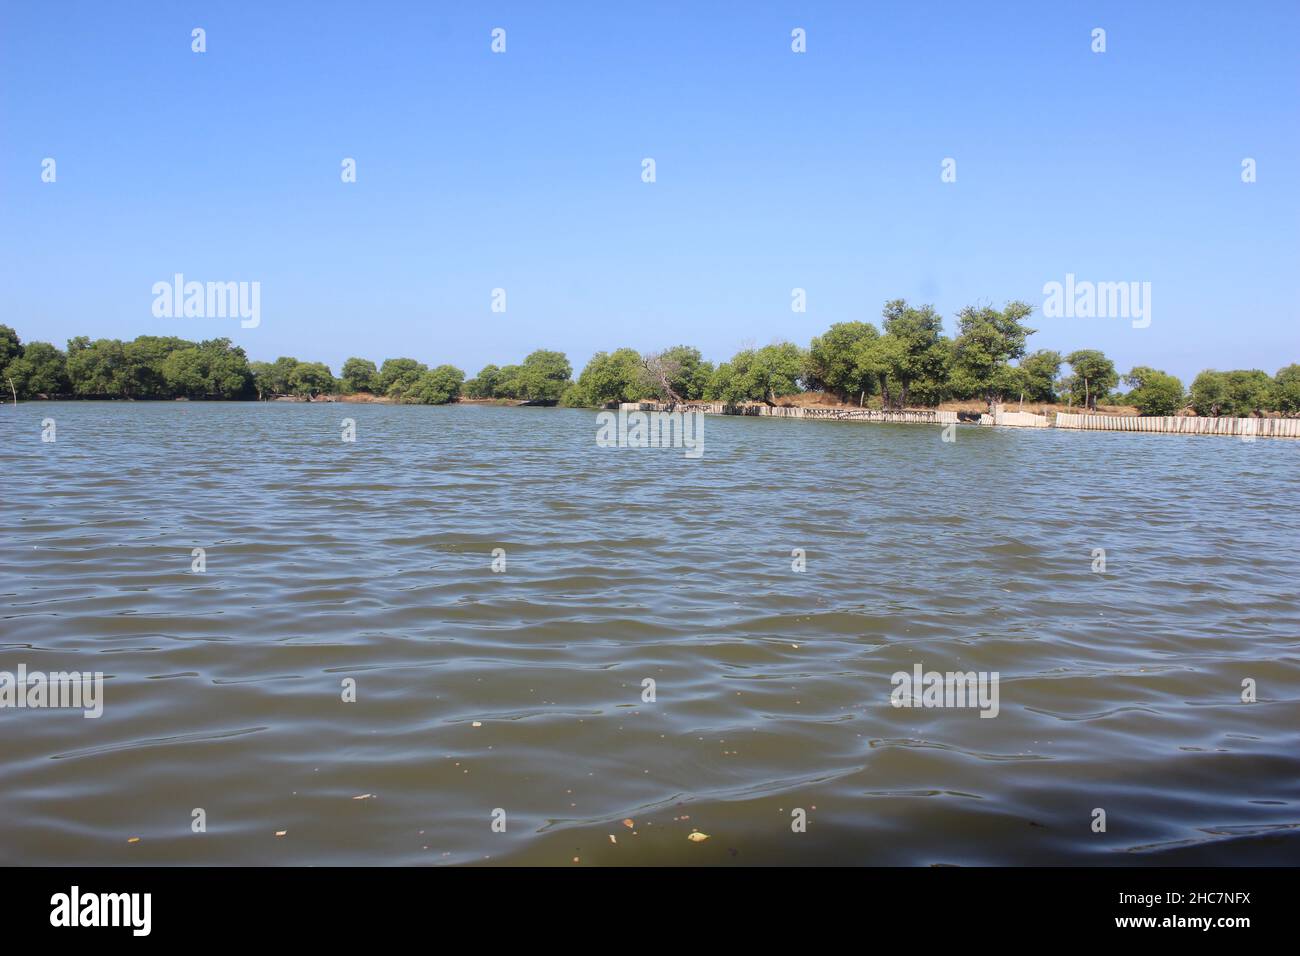 Aquaculture ponds that produce fish and are used for fishing grounds Stock Photo